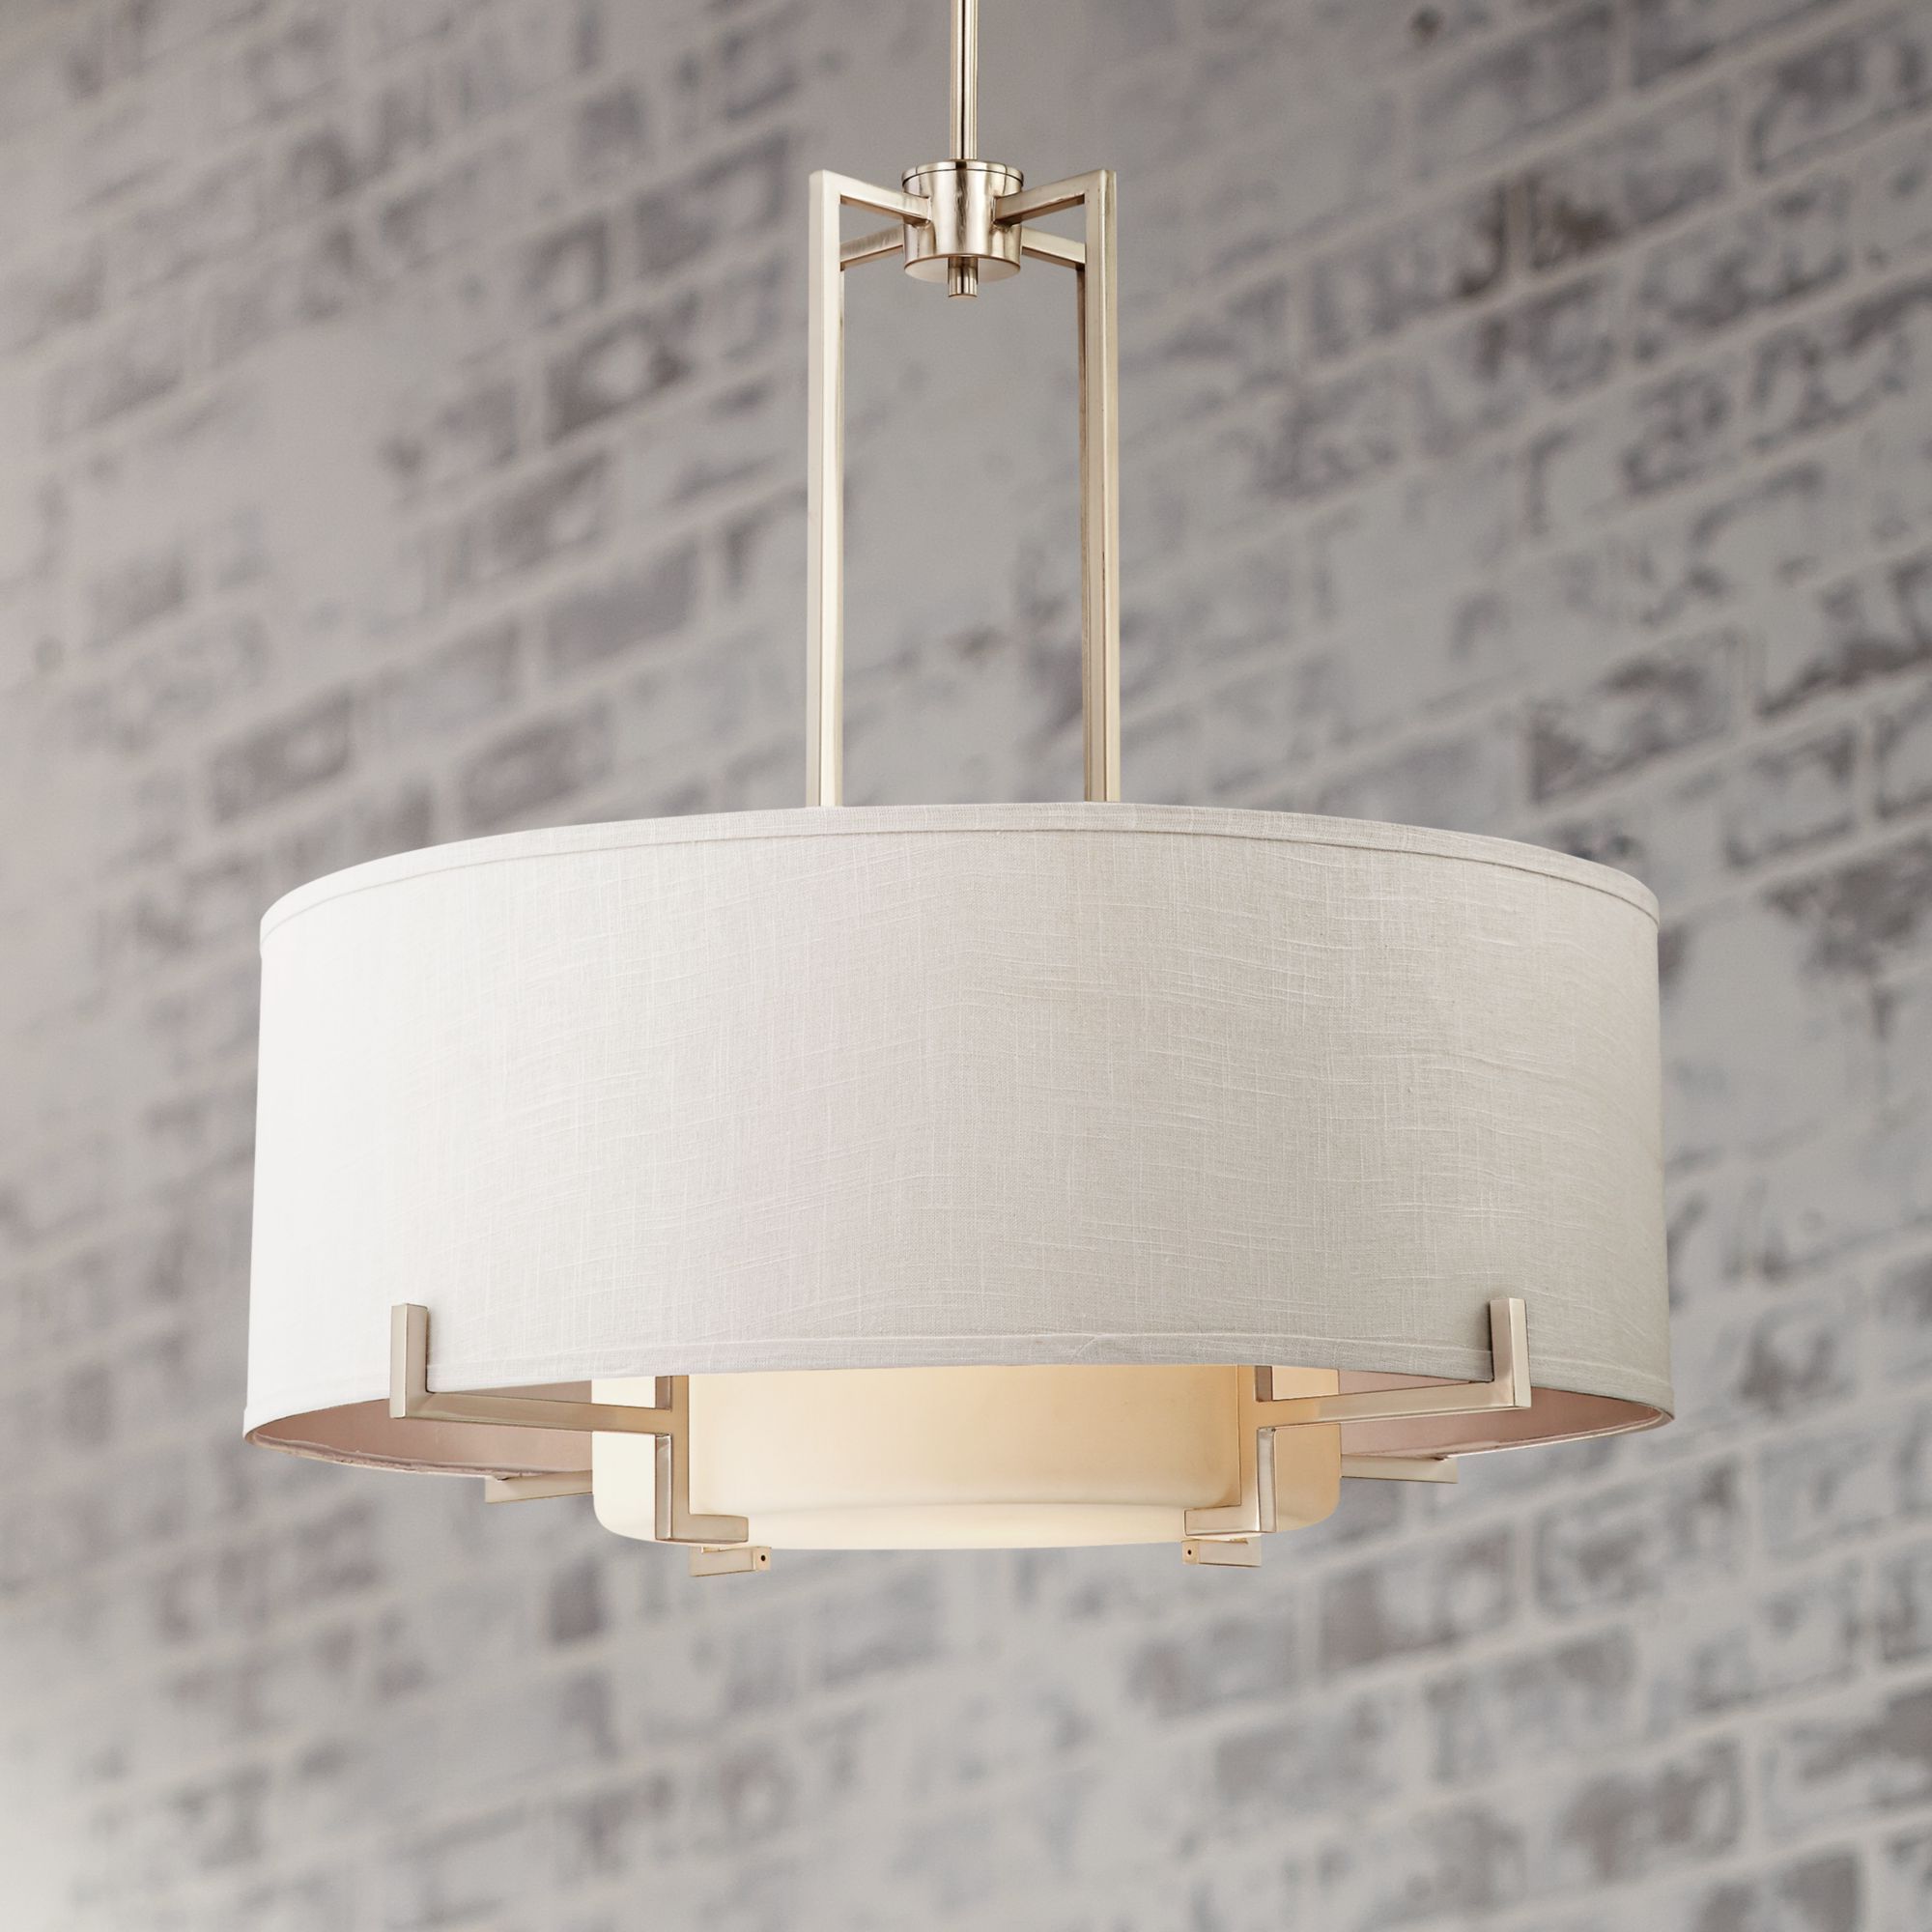 Polished Nickel And Crystal Modern Pendant Lights Throughout Newest Possini Euro Design Brushed Nickel Pendant Chandelier  (View 13 of 20)